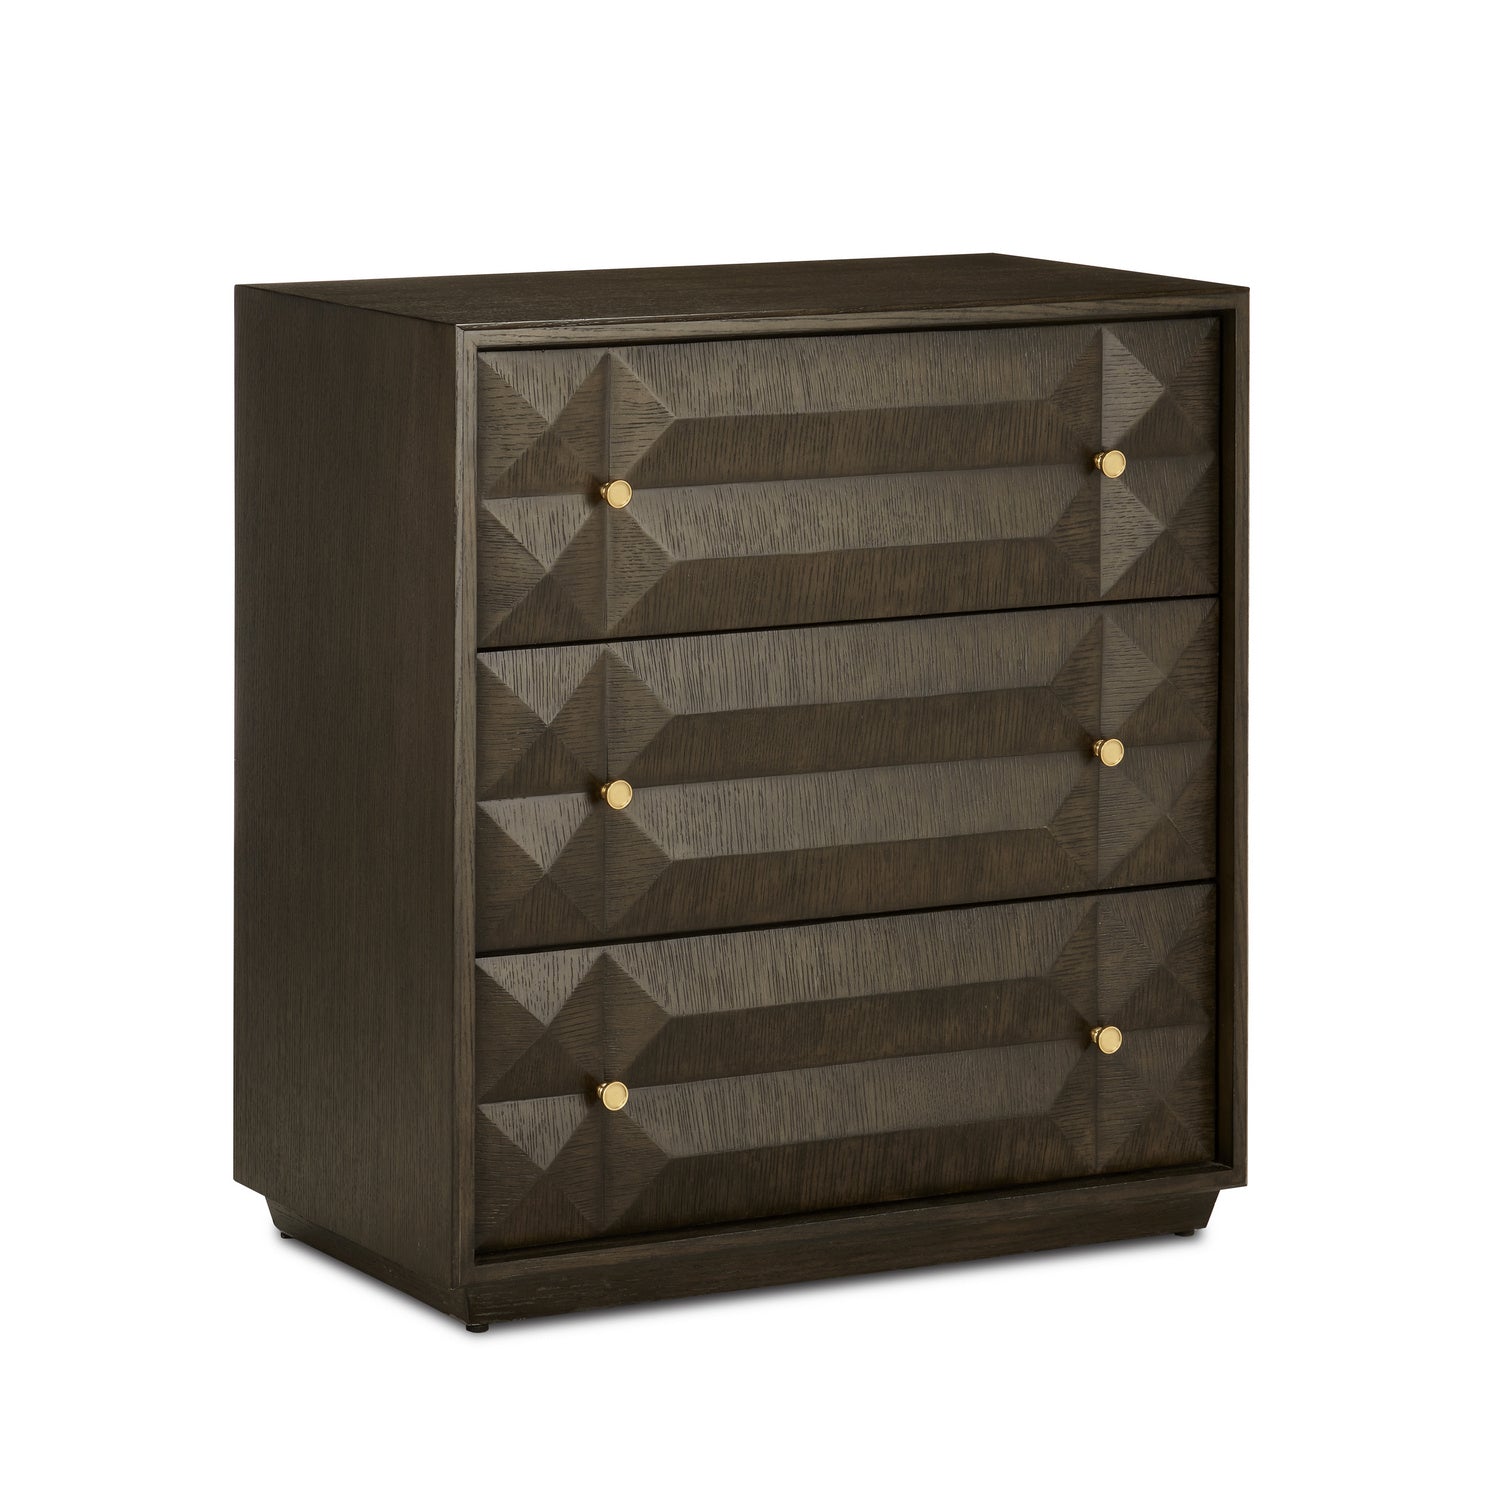 Currey and Company - 3000-0226 - Chest - Kendall - Dove Gray/Polished Brass